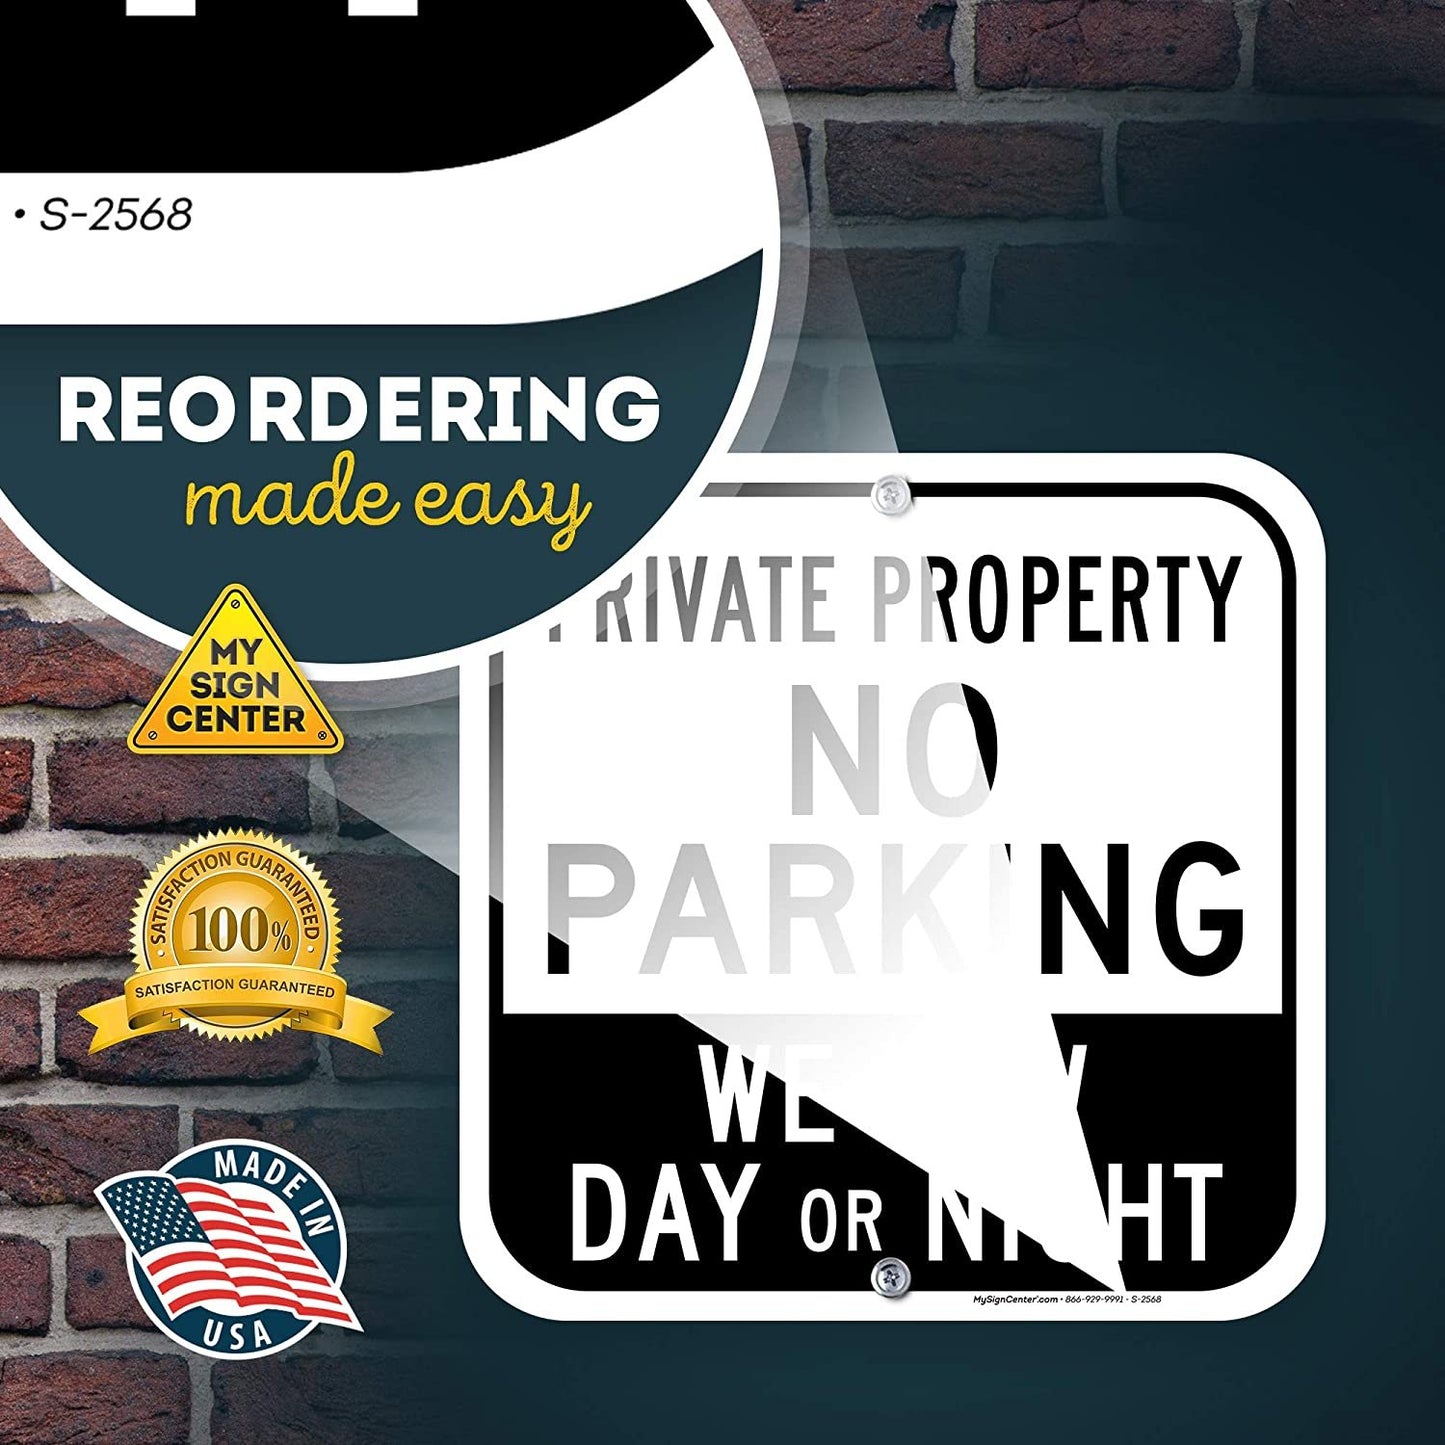 Private Property No Parking Sign Day Or Night Towing Enforced Sign